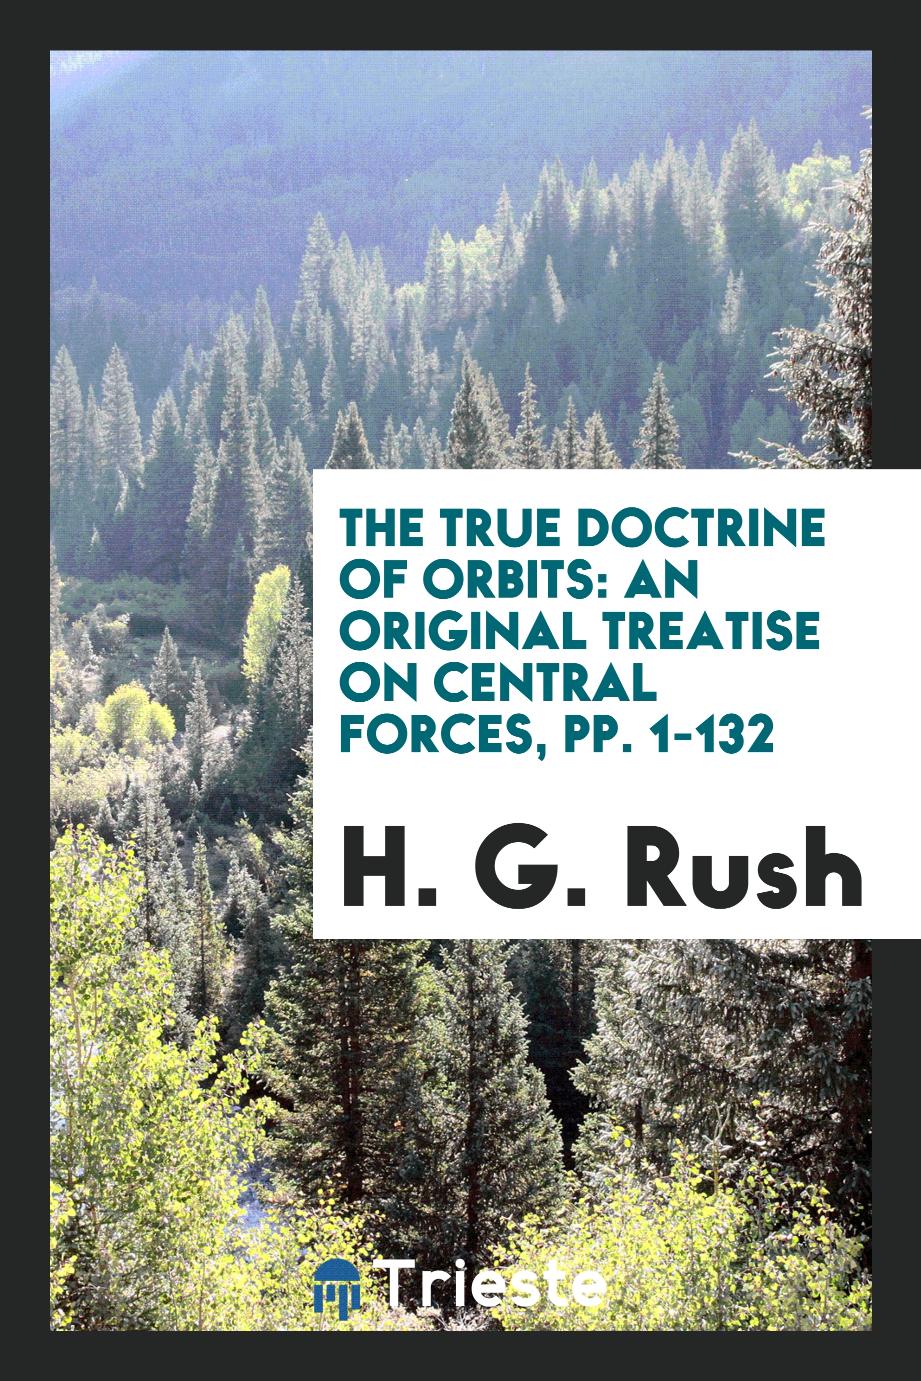 The True Doctrine of Orbits: An Original Treatise on Central Forces, pp. 1-132